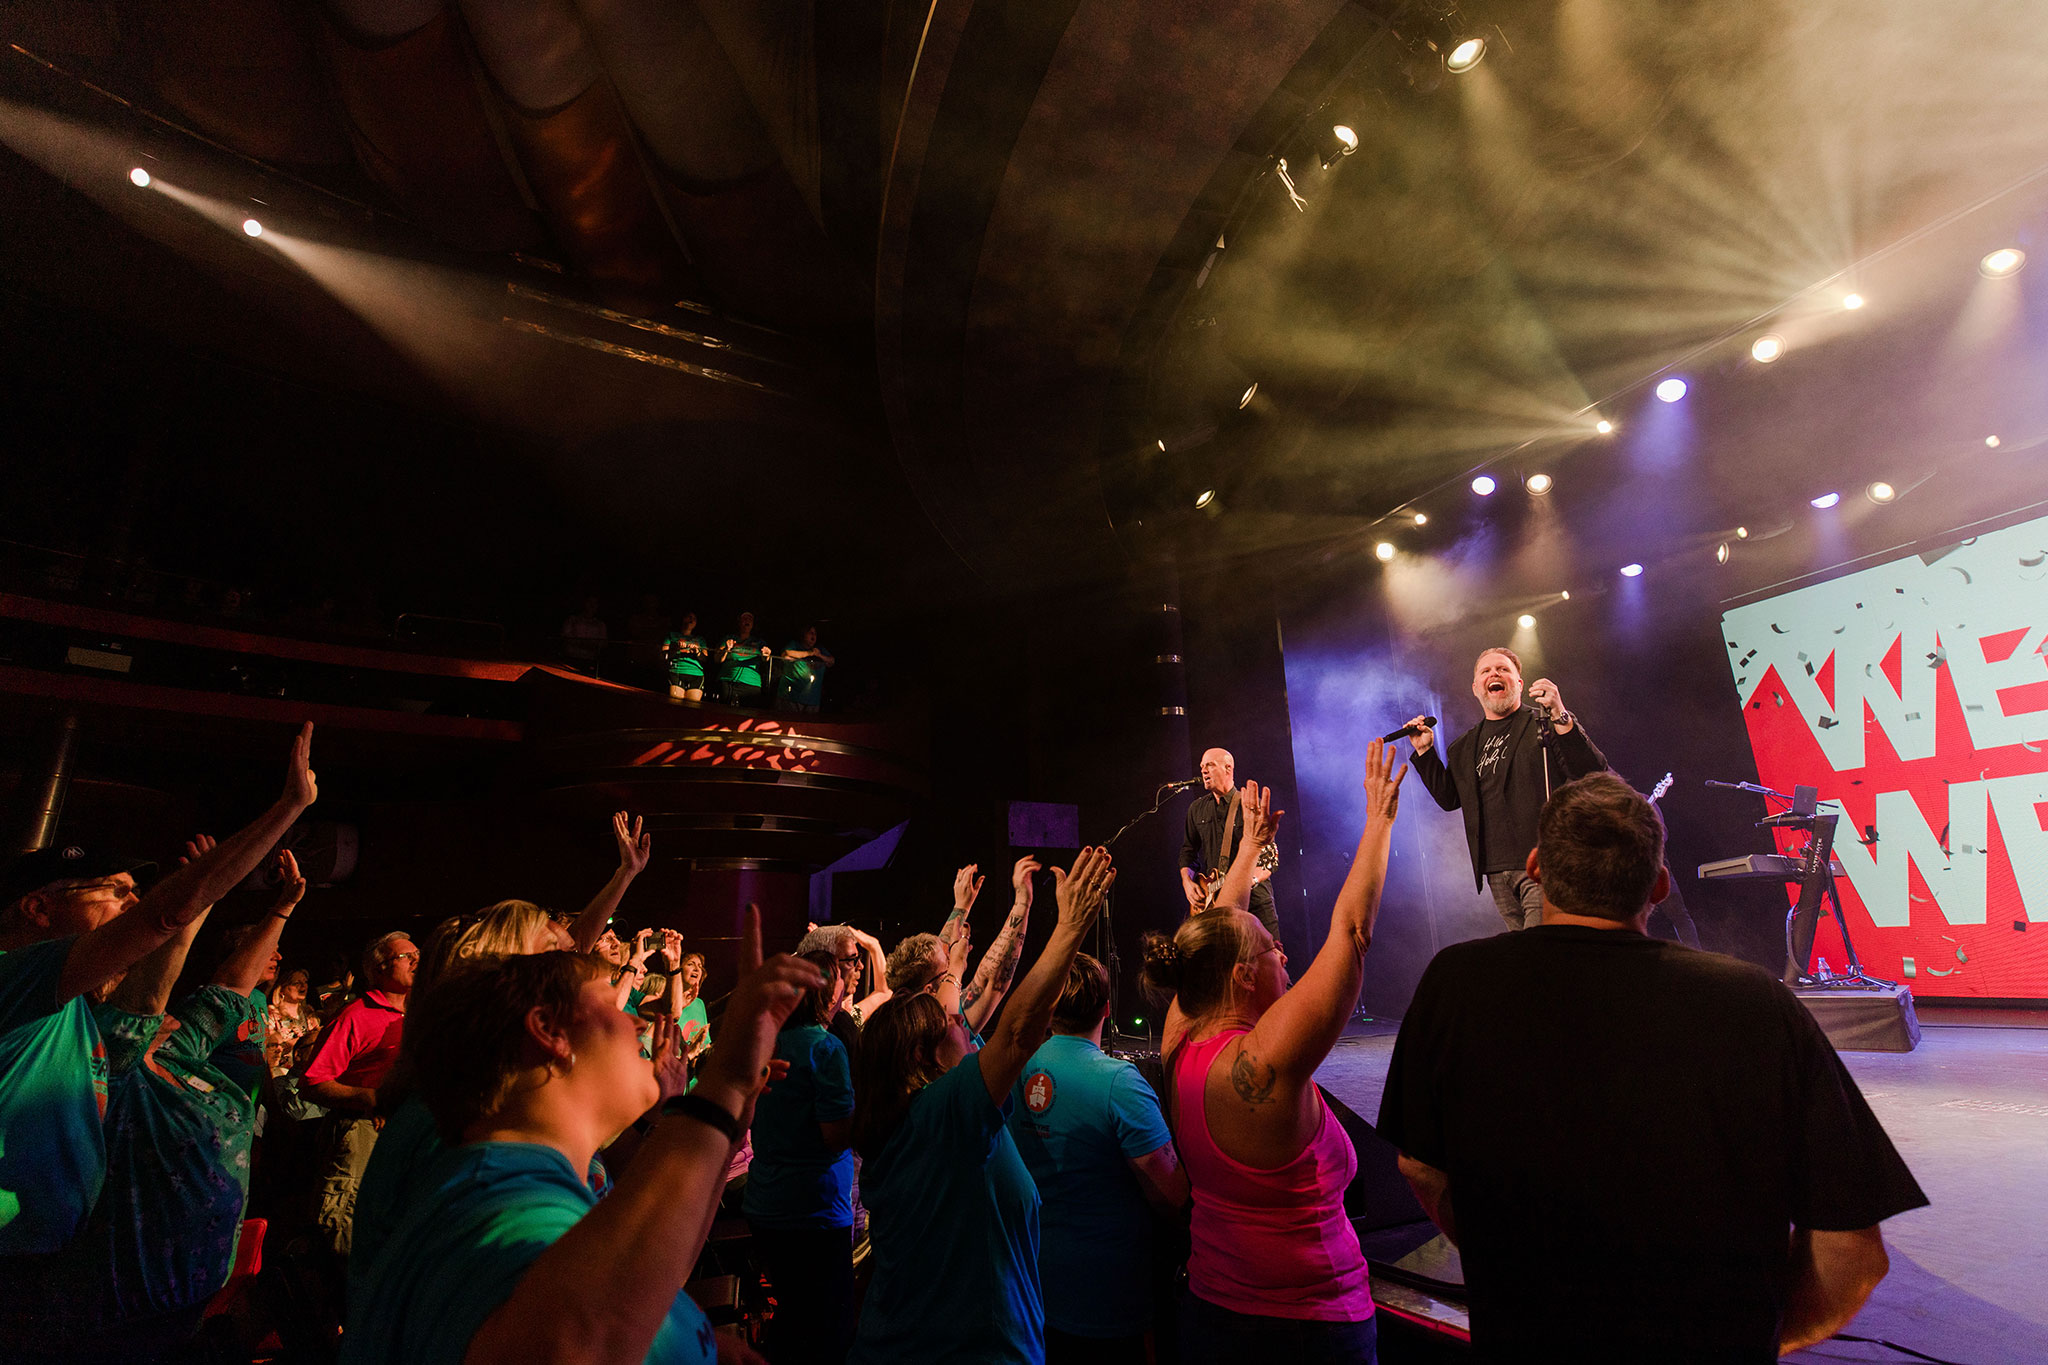 An engaging moment at a concert with a singer onstage and enthusiastic fans in the foreground, hands uplifted, in a dimly lit theater with colorful stage lighting.